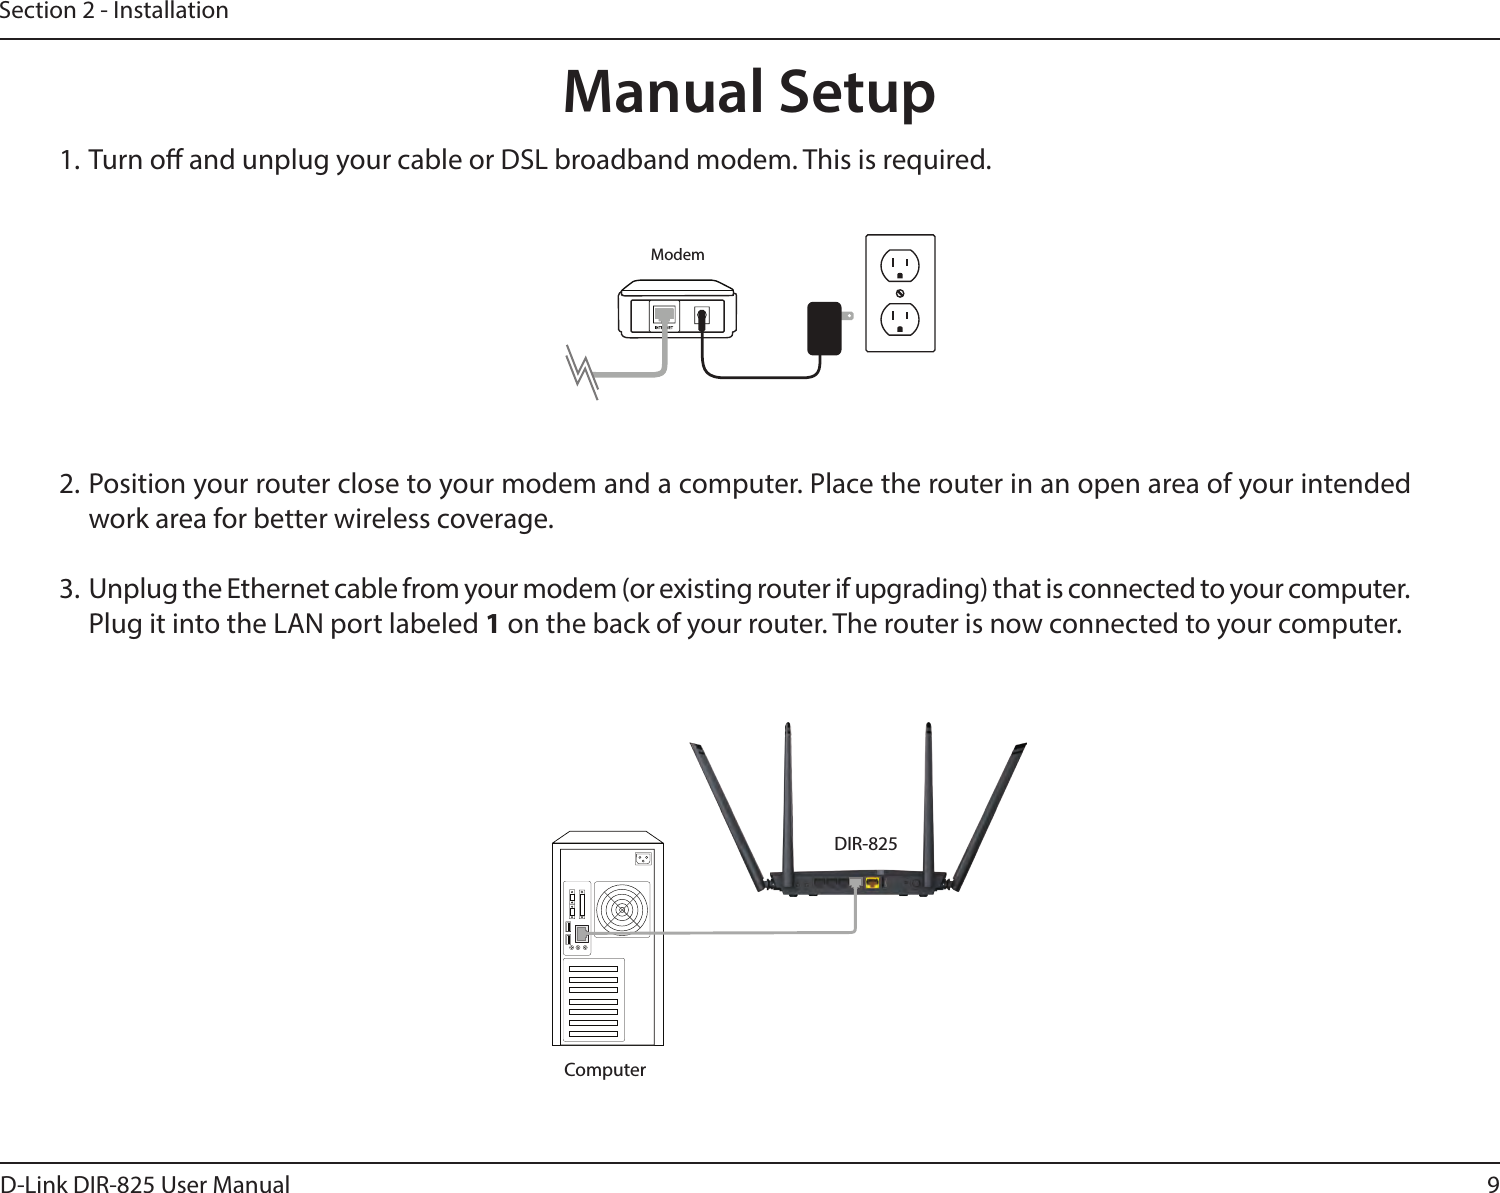 9D-Link DIR-825 User ManualSection 2 - Installation1. Turn o and unplug your cable or DSL broadband modem. This is required.Manual Setup2. Position your router close to your modem and a computer. Place the router in an open area of your intended work area for better wireless coverage.3.  Unplug the Ethernet cable from your modem (or existing router if upgrading) that is connected to your computer. Plug it into the LAN port labeled 1 on the back of your router. The router is now connected to your computer.ModemDIR-825Computer